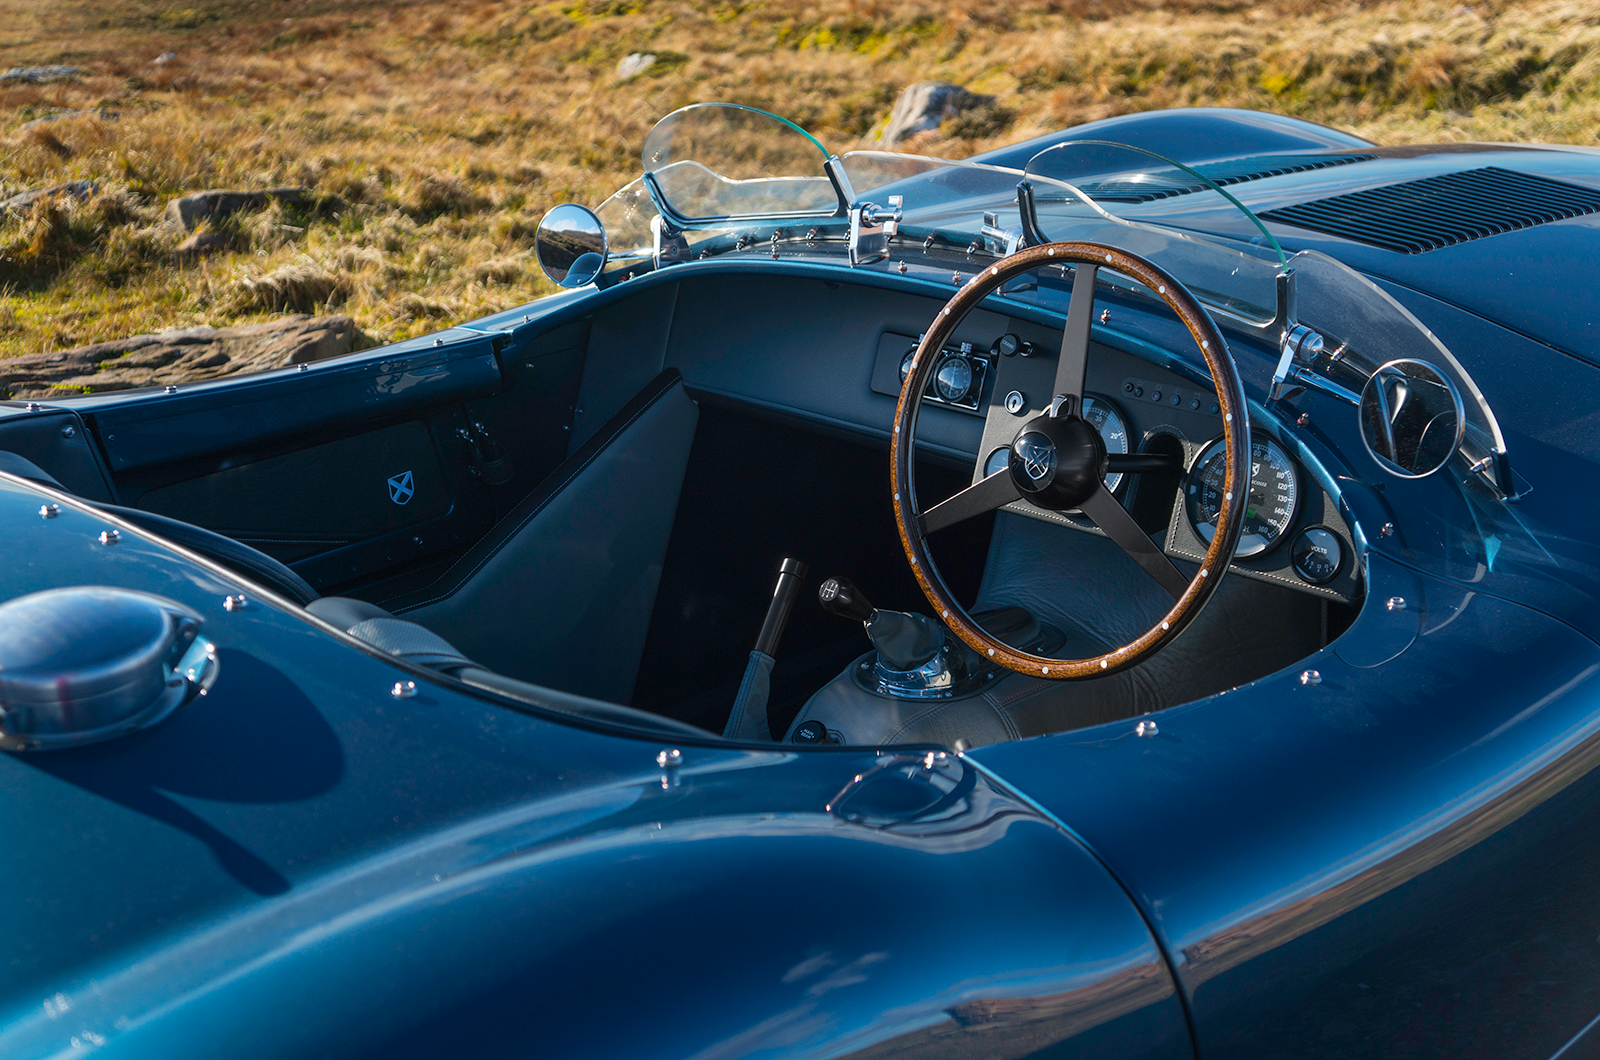 Classic & Sports Car – New Ecurie Ecosse C-types revealed